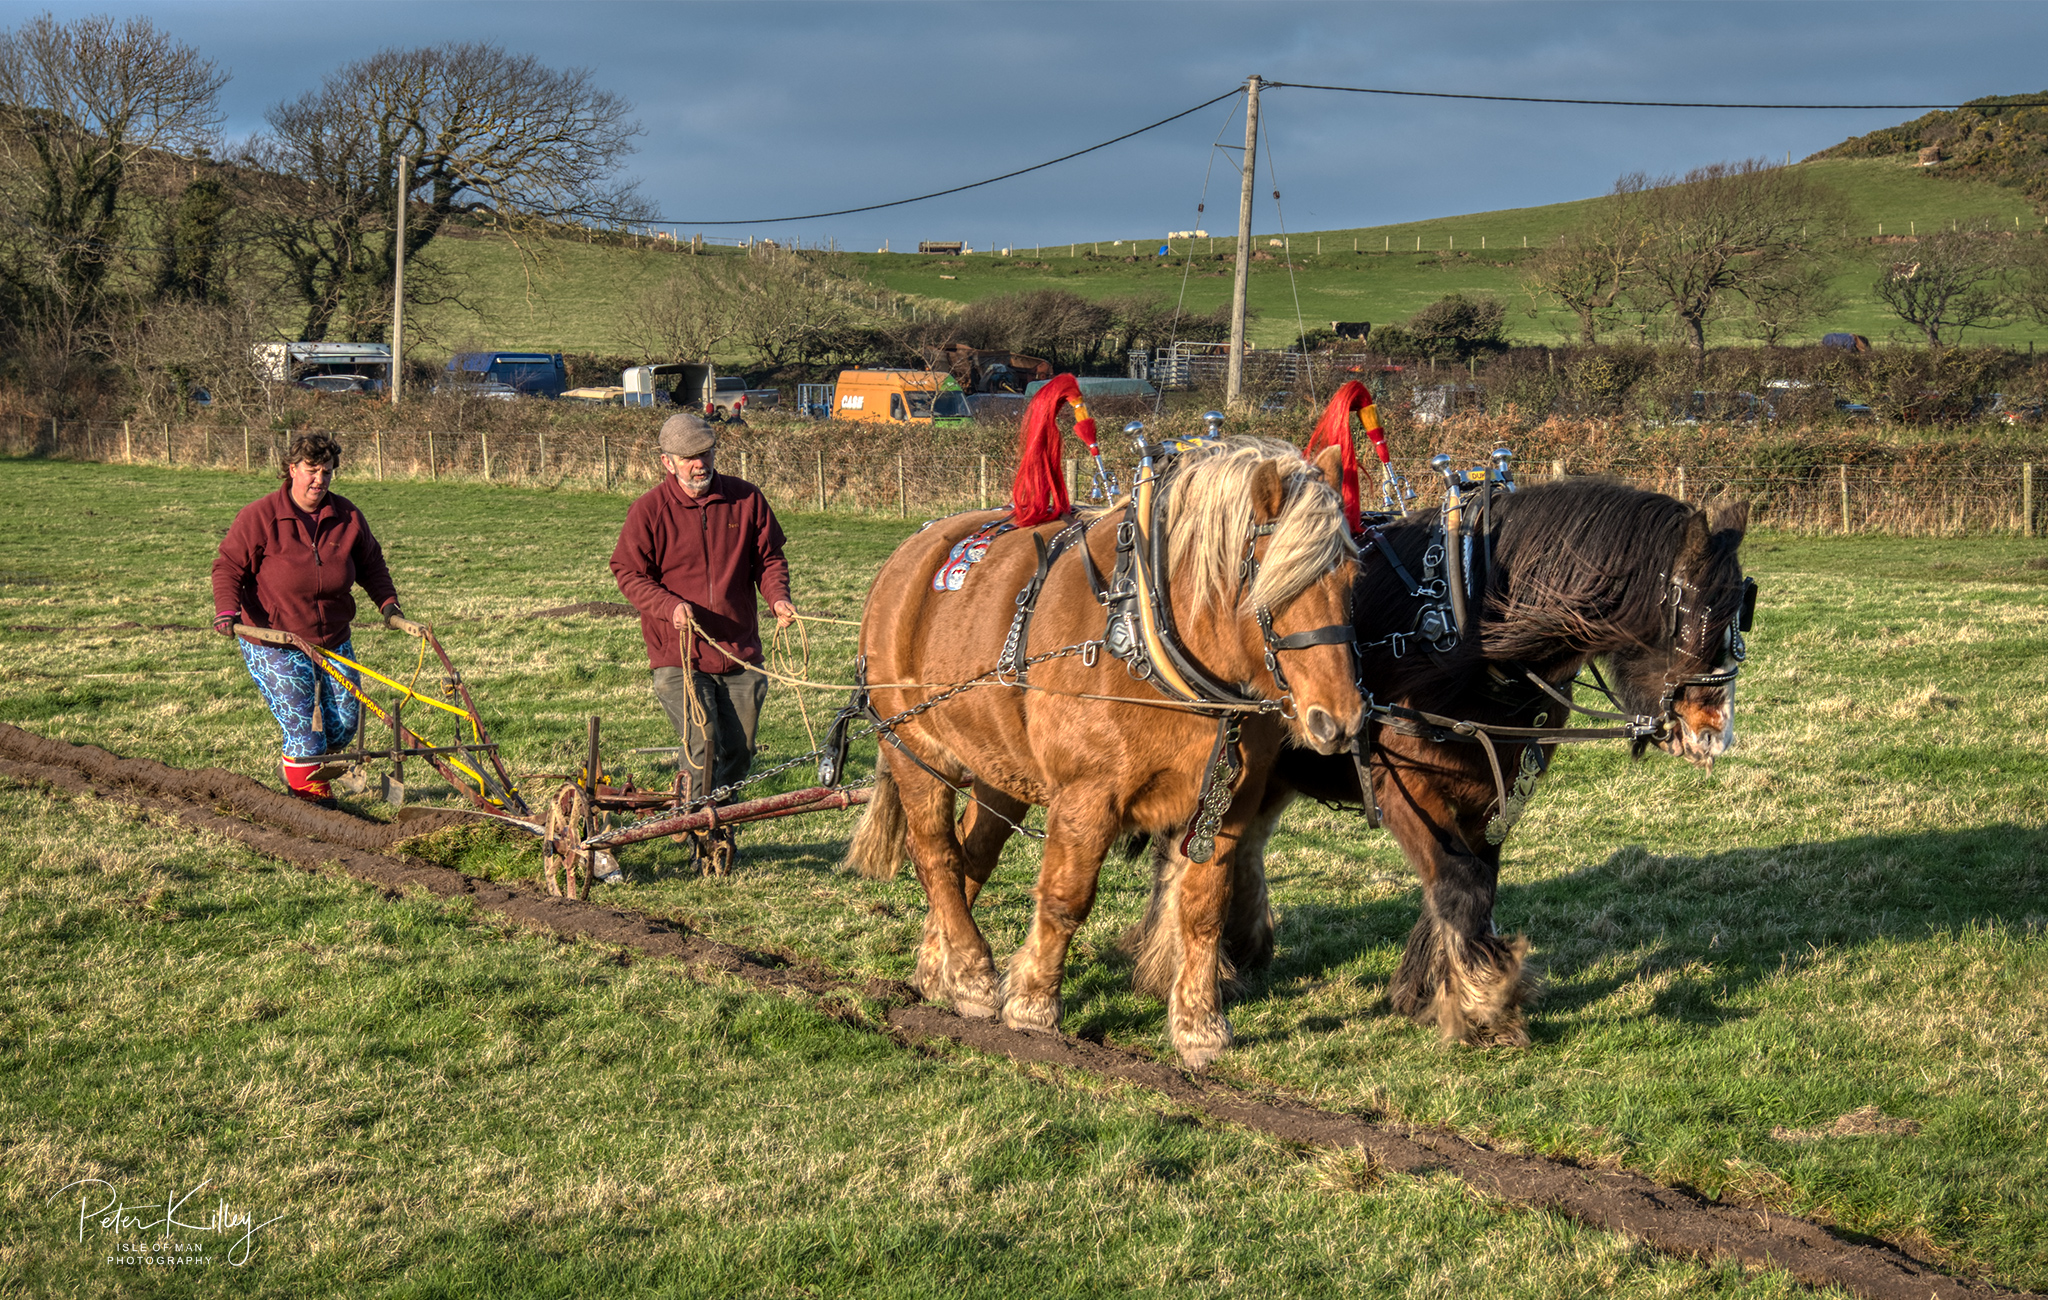 Ploughing old Isle of Man style - © Peter Killey - www.manxscenes.com